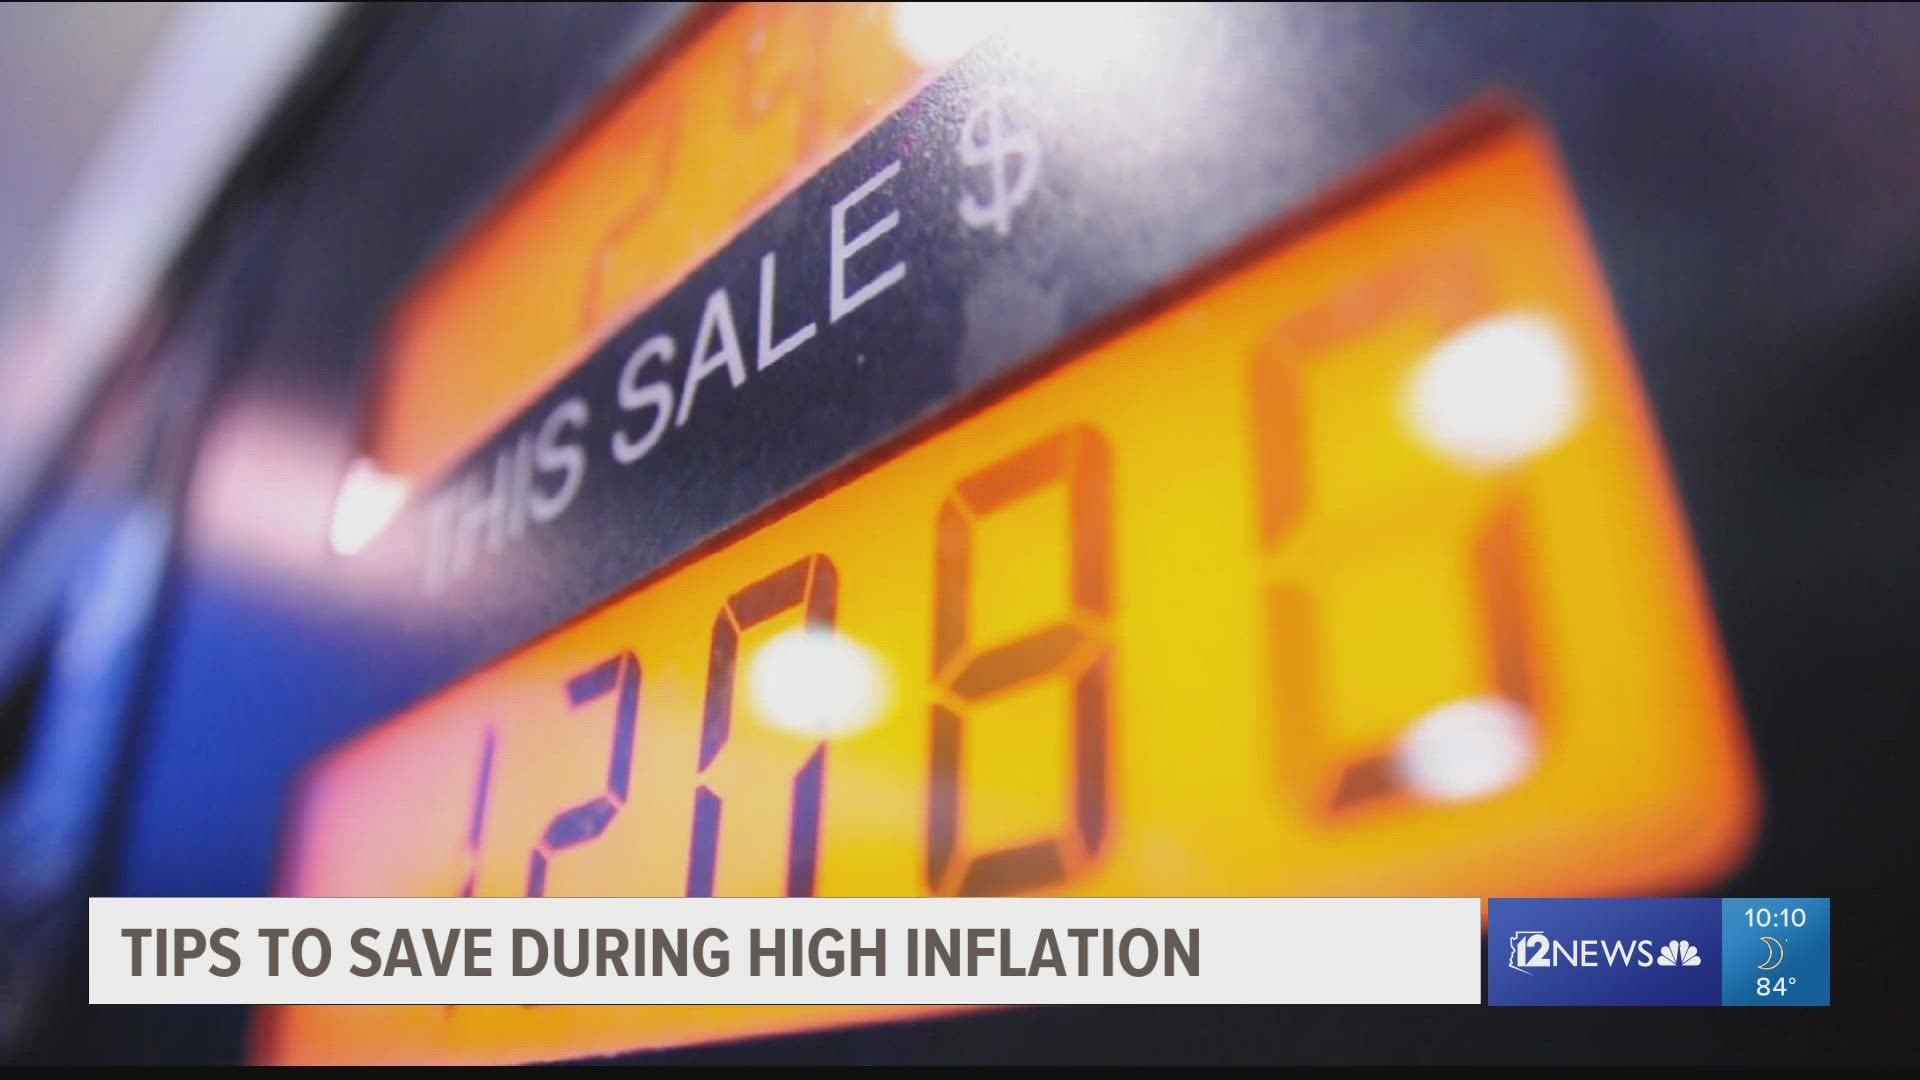 An Edward Jones financial advisor shares how to manage the growing inflation and changes in the market.